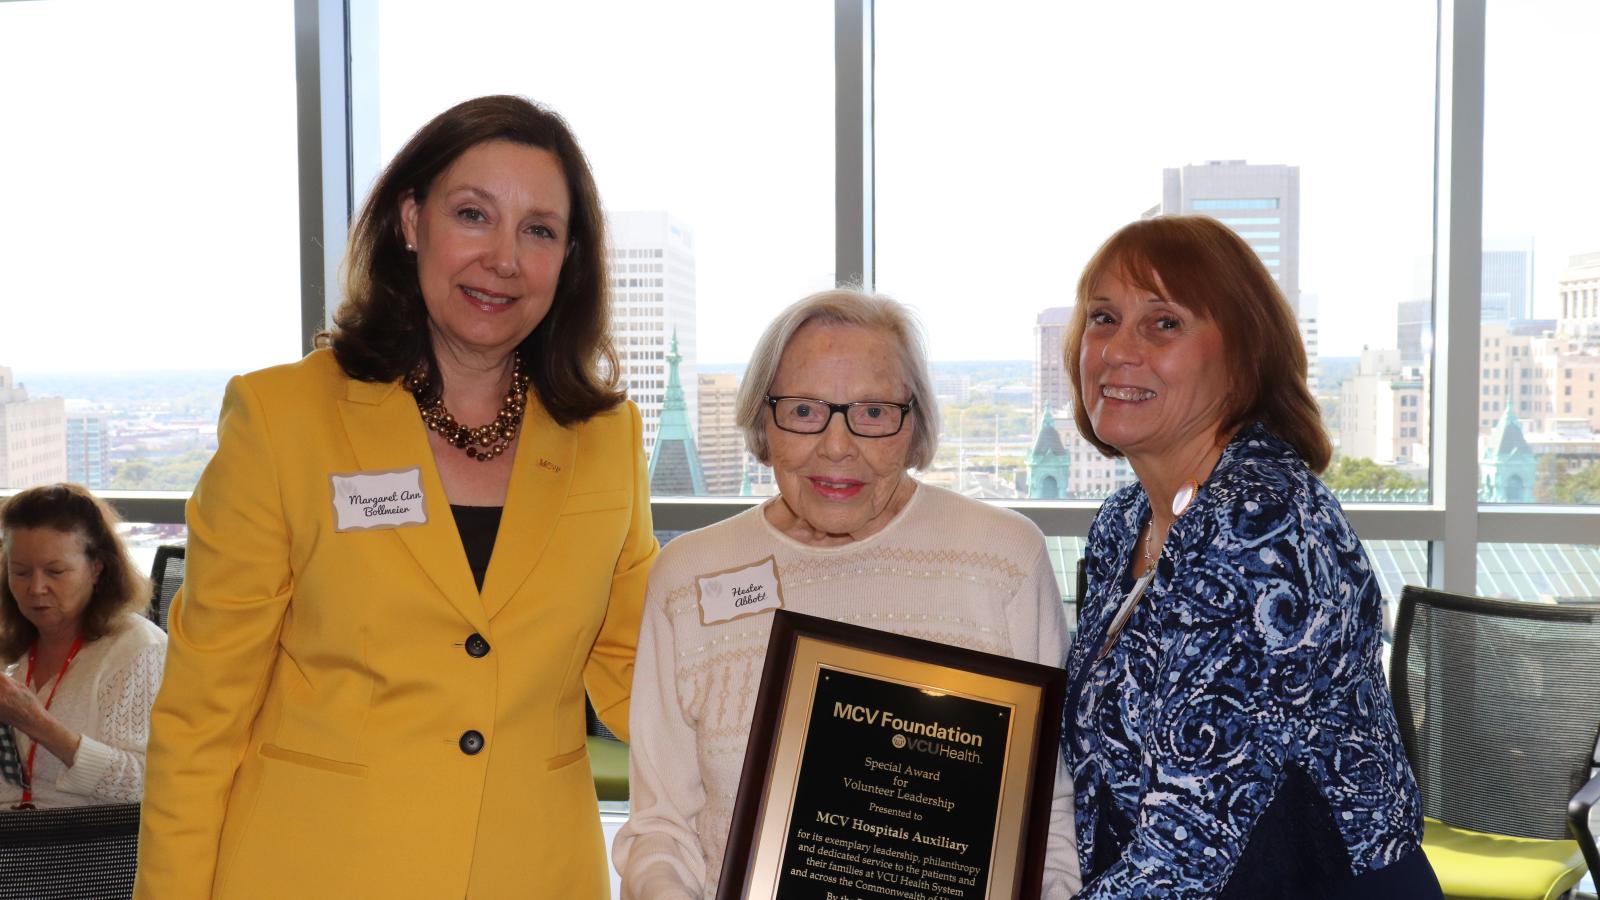 Margaret Ann Bollmeier (left), MCV Foundation president, with Hester Abbott (center), one of the MCV Hospitals Auxiliary’s founding members, and Ginny Little, the auxiliary’s current president.